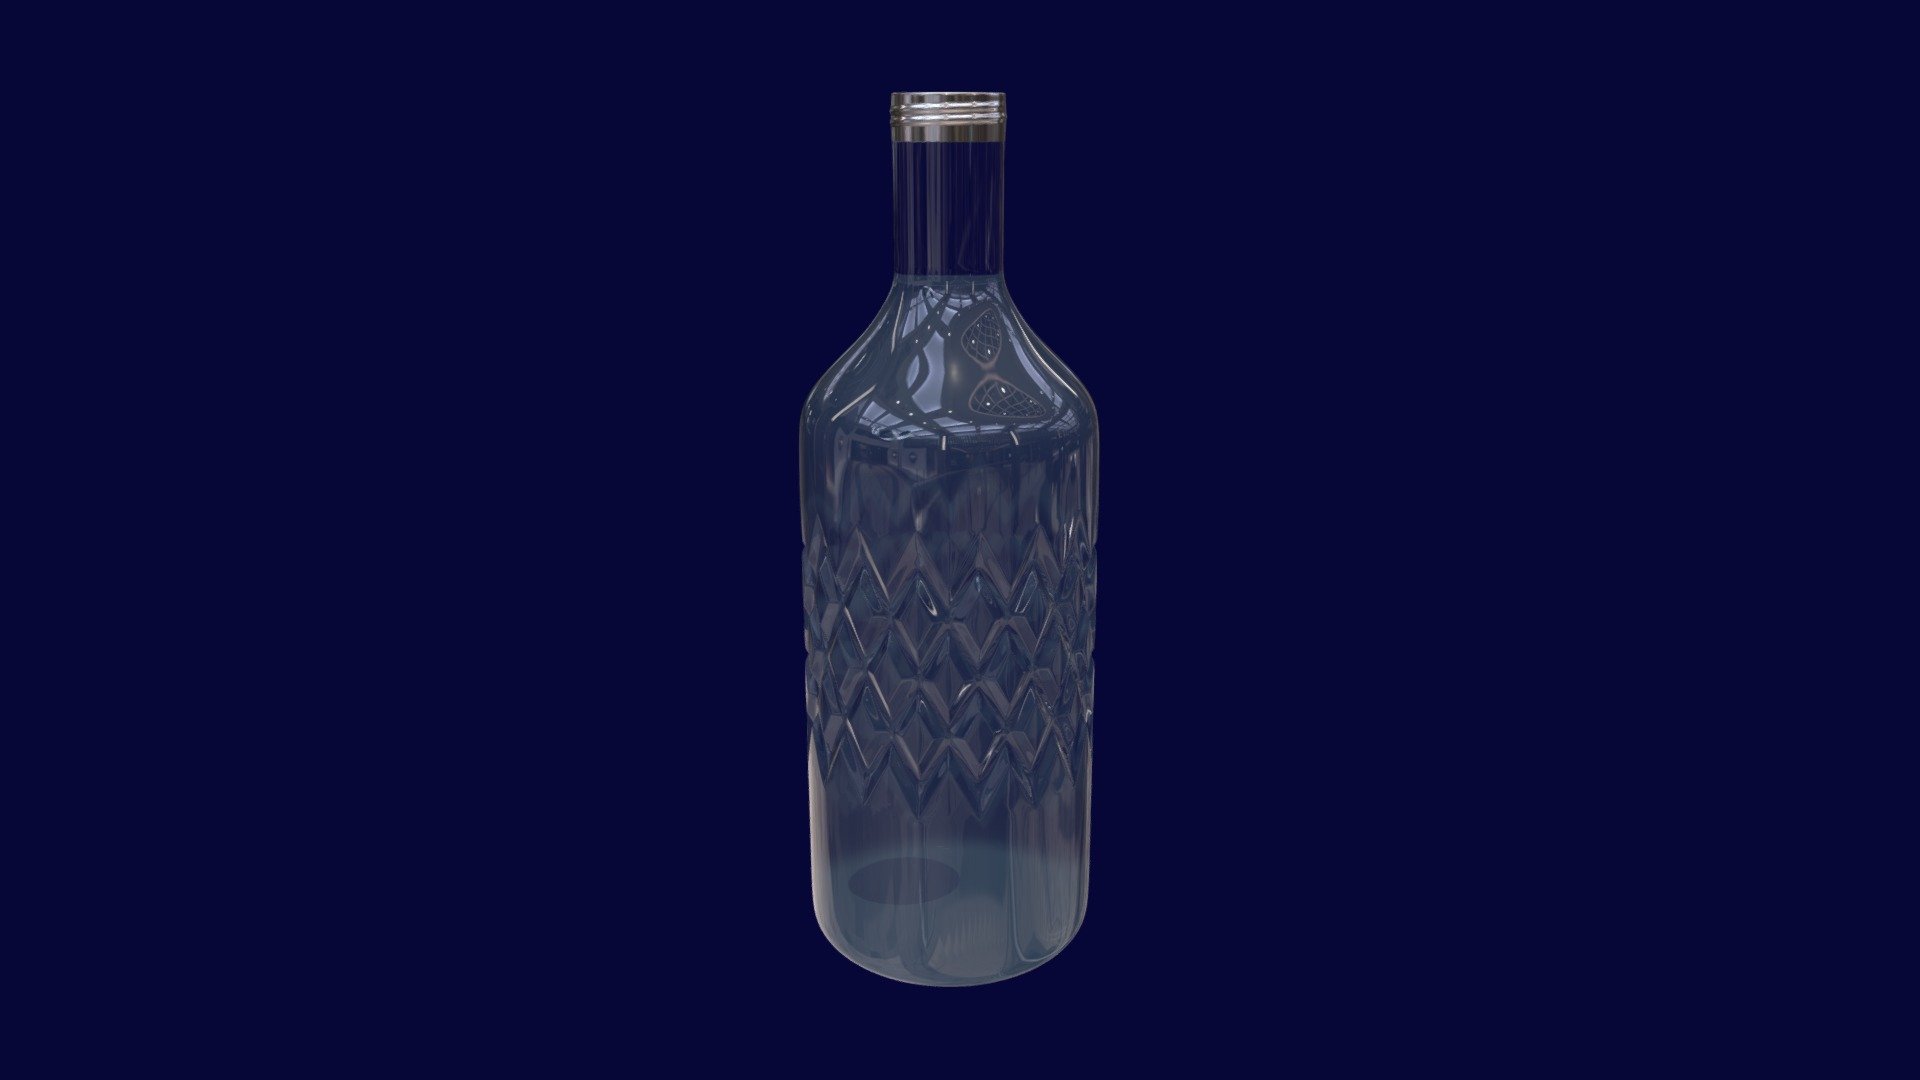 3D Model of a glass water bottle.

Originally modelled in Blender

Hope you like it!

Also check out my other models, just click on my username to see a complete gallery 3d model